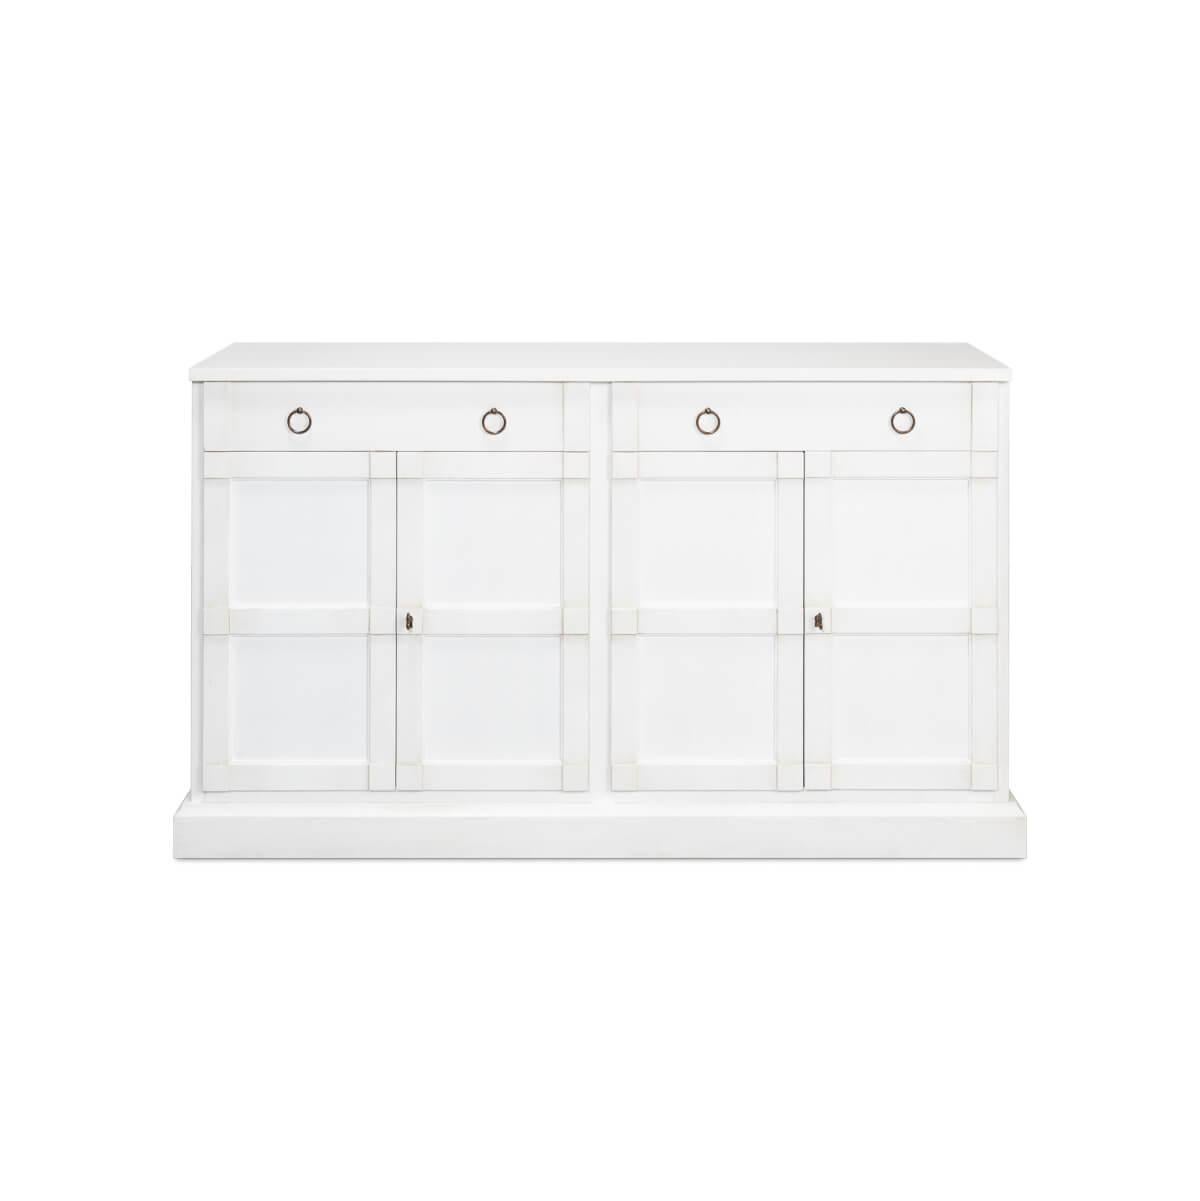 Dressed in Cortina white, it features a clean, linear silhouette that brings an airy spaciousness to any room. The paneled doors are framed by subtle accents.

With two frieze drawers and two cupboard doors that open to interior shelves, the